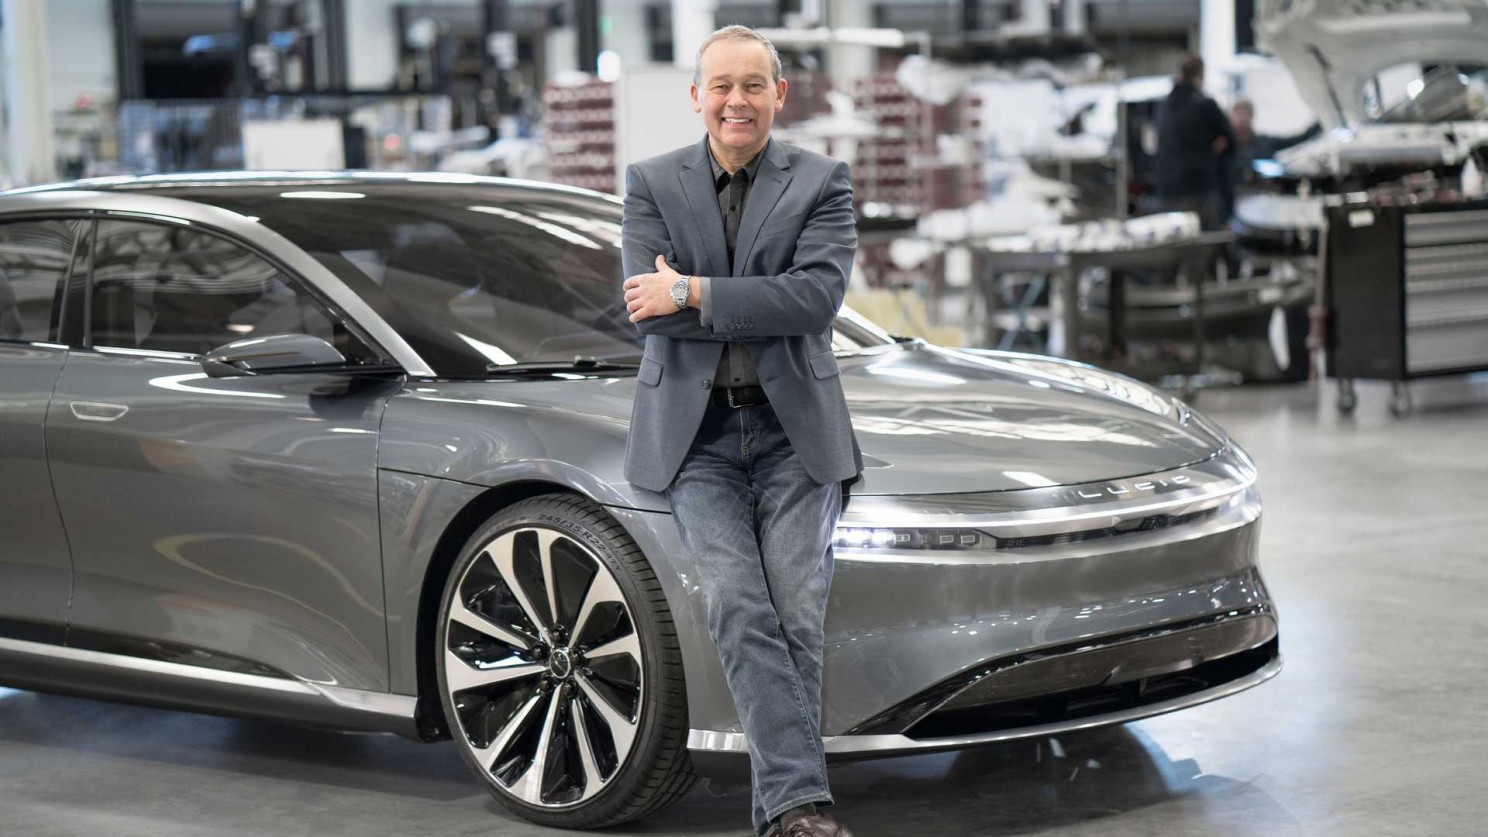 Can The Lucid Air Fix Tesla's Mistakes?